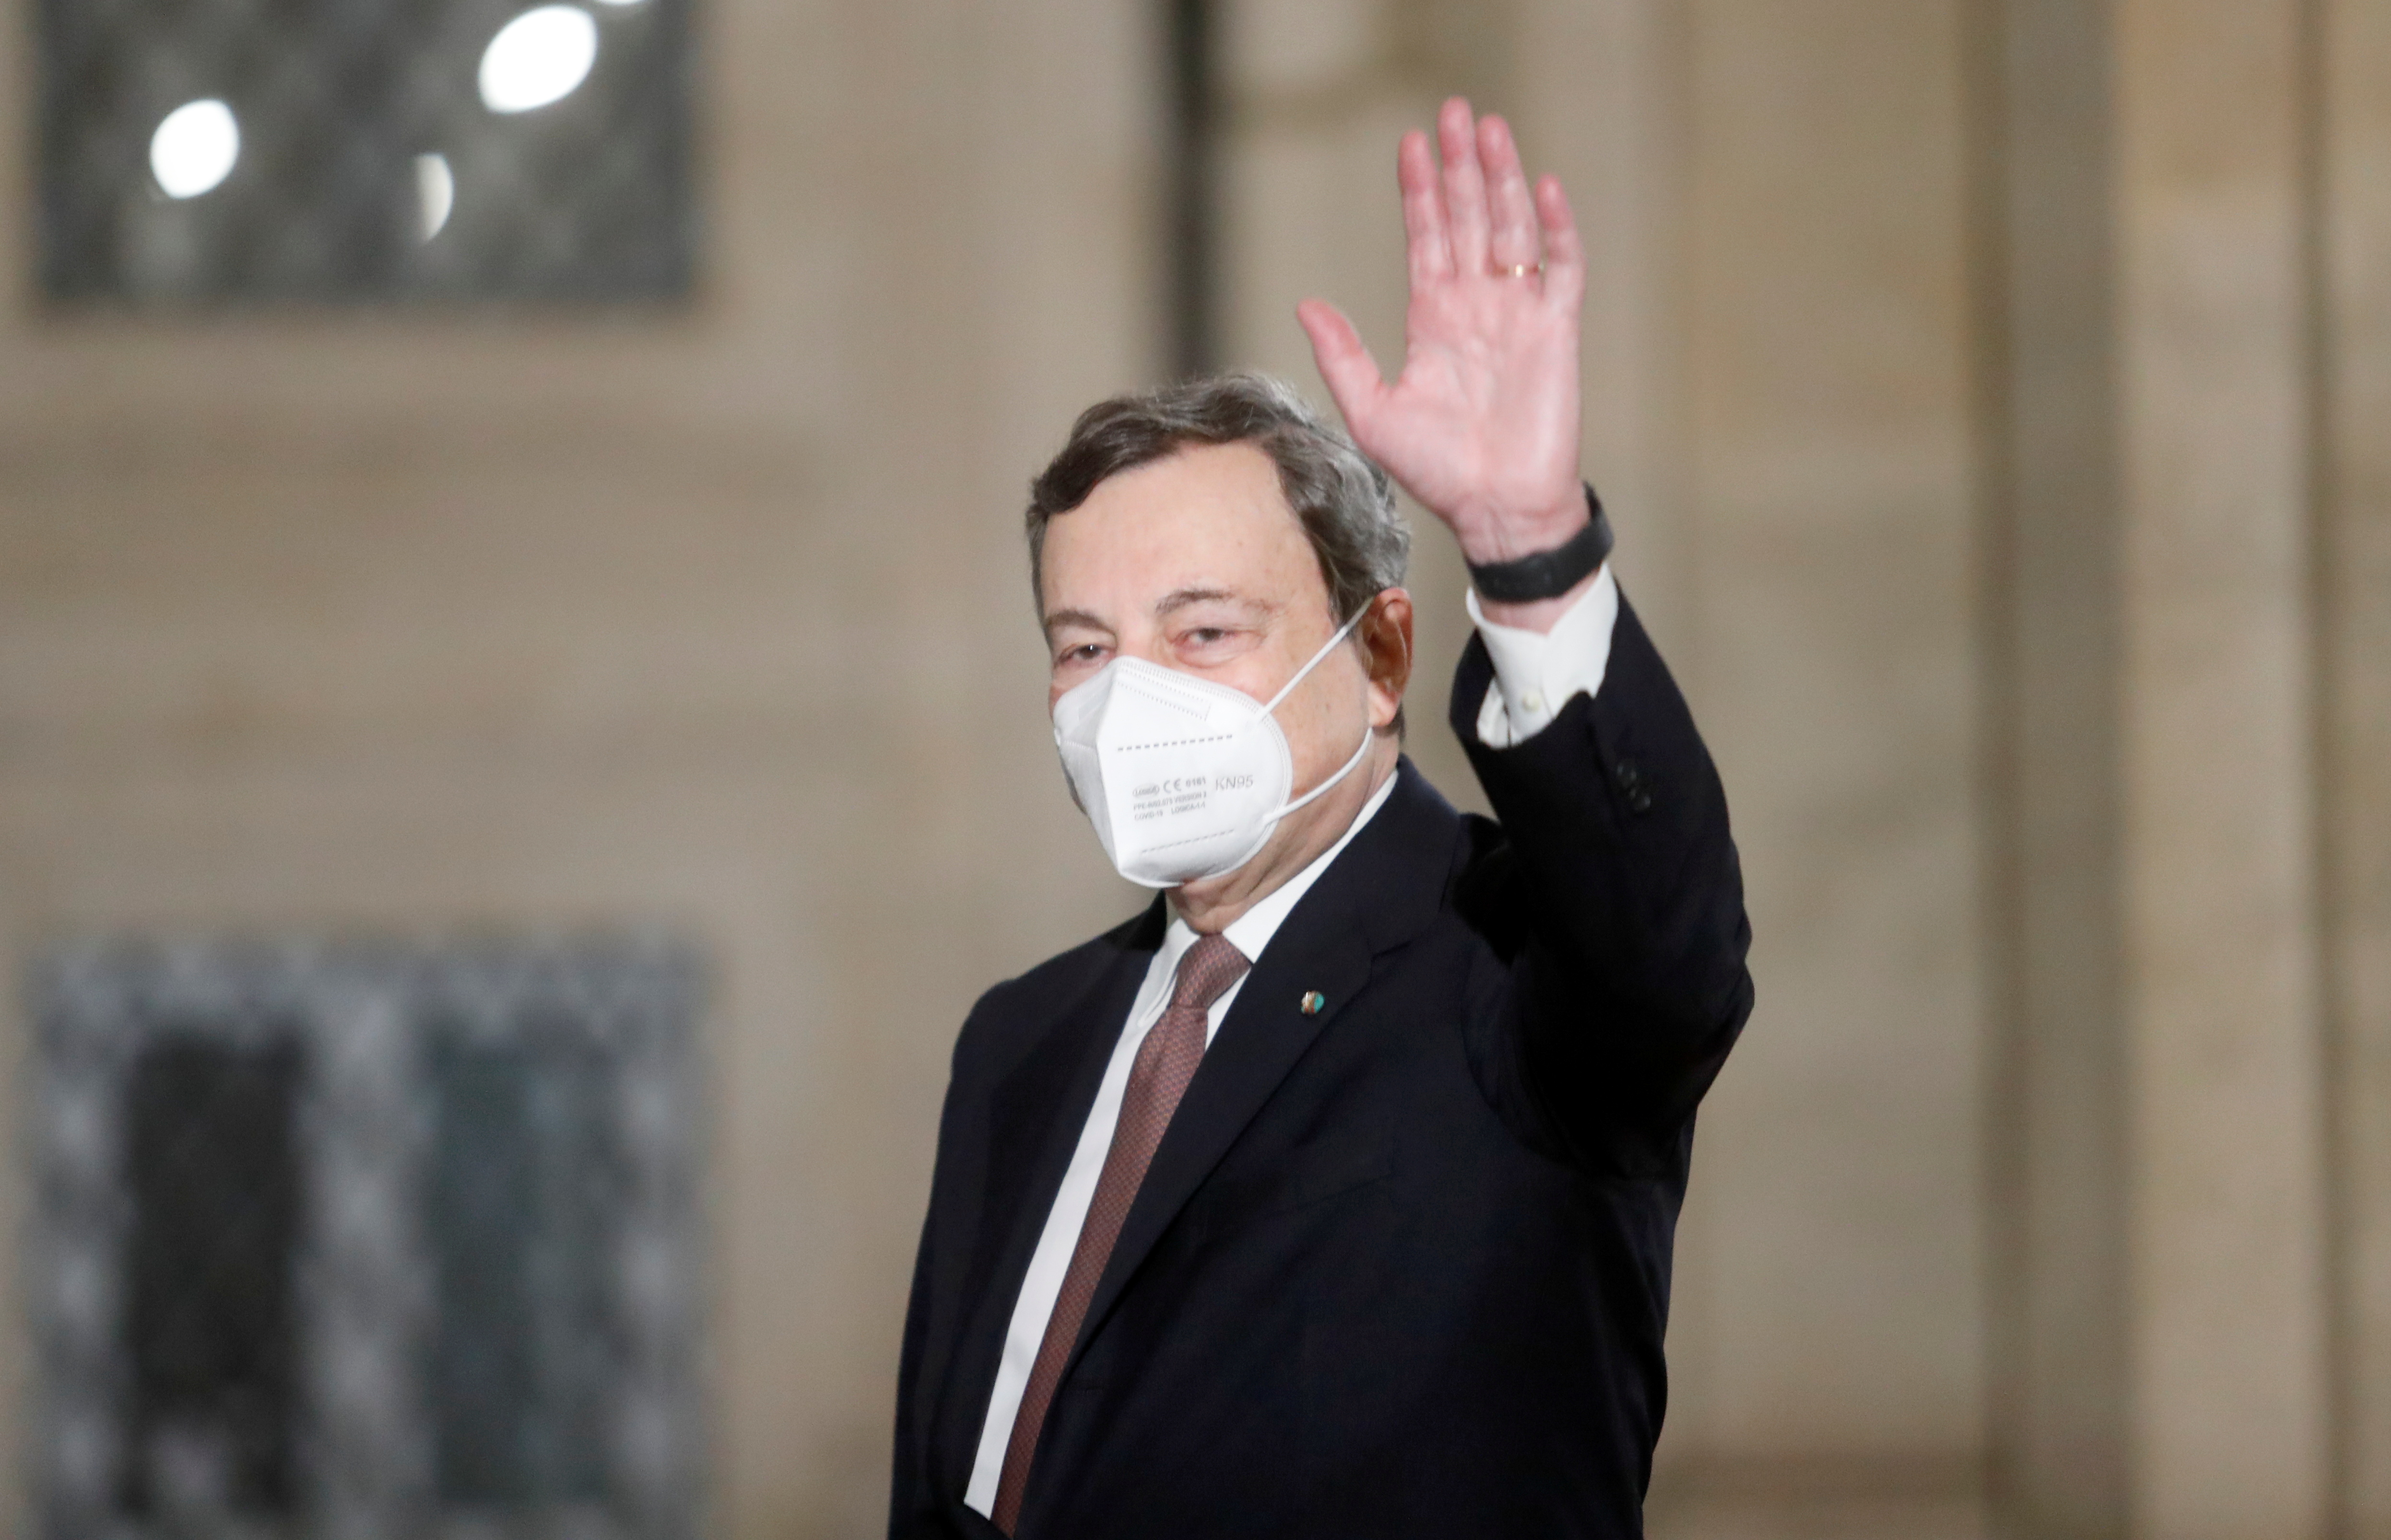 Incoming Italian Prime Minister Mario Draghi leaves after a meeting with Italian President Sergio Mattarella in Rome